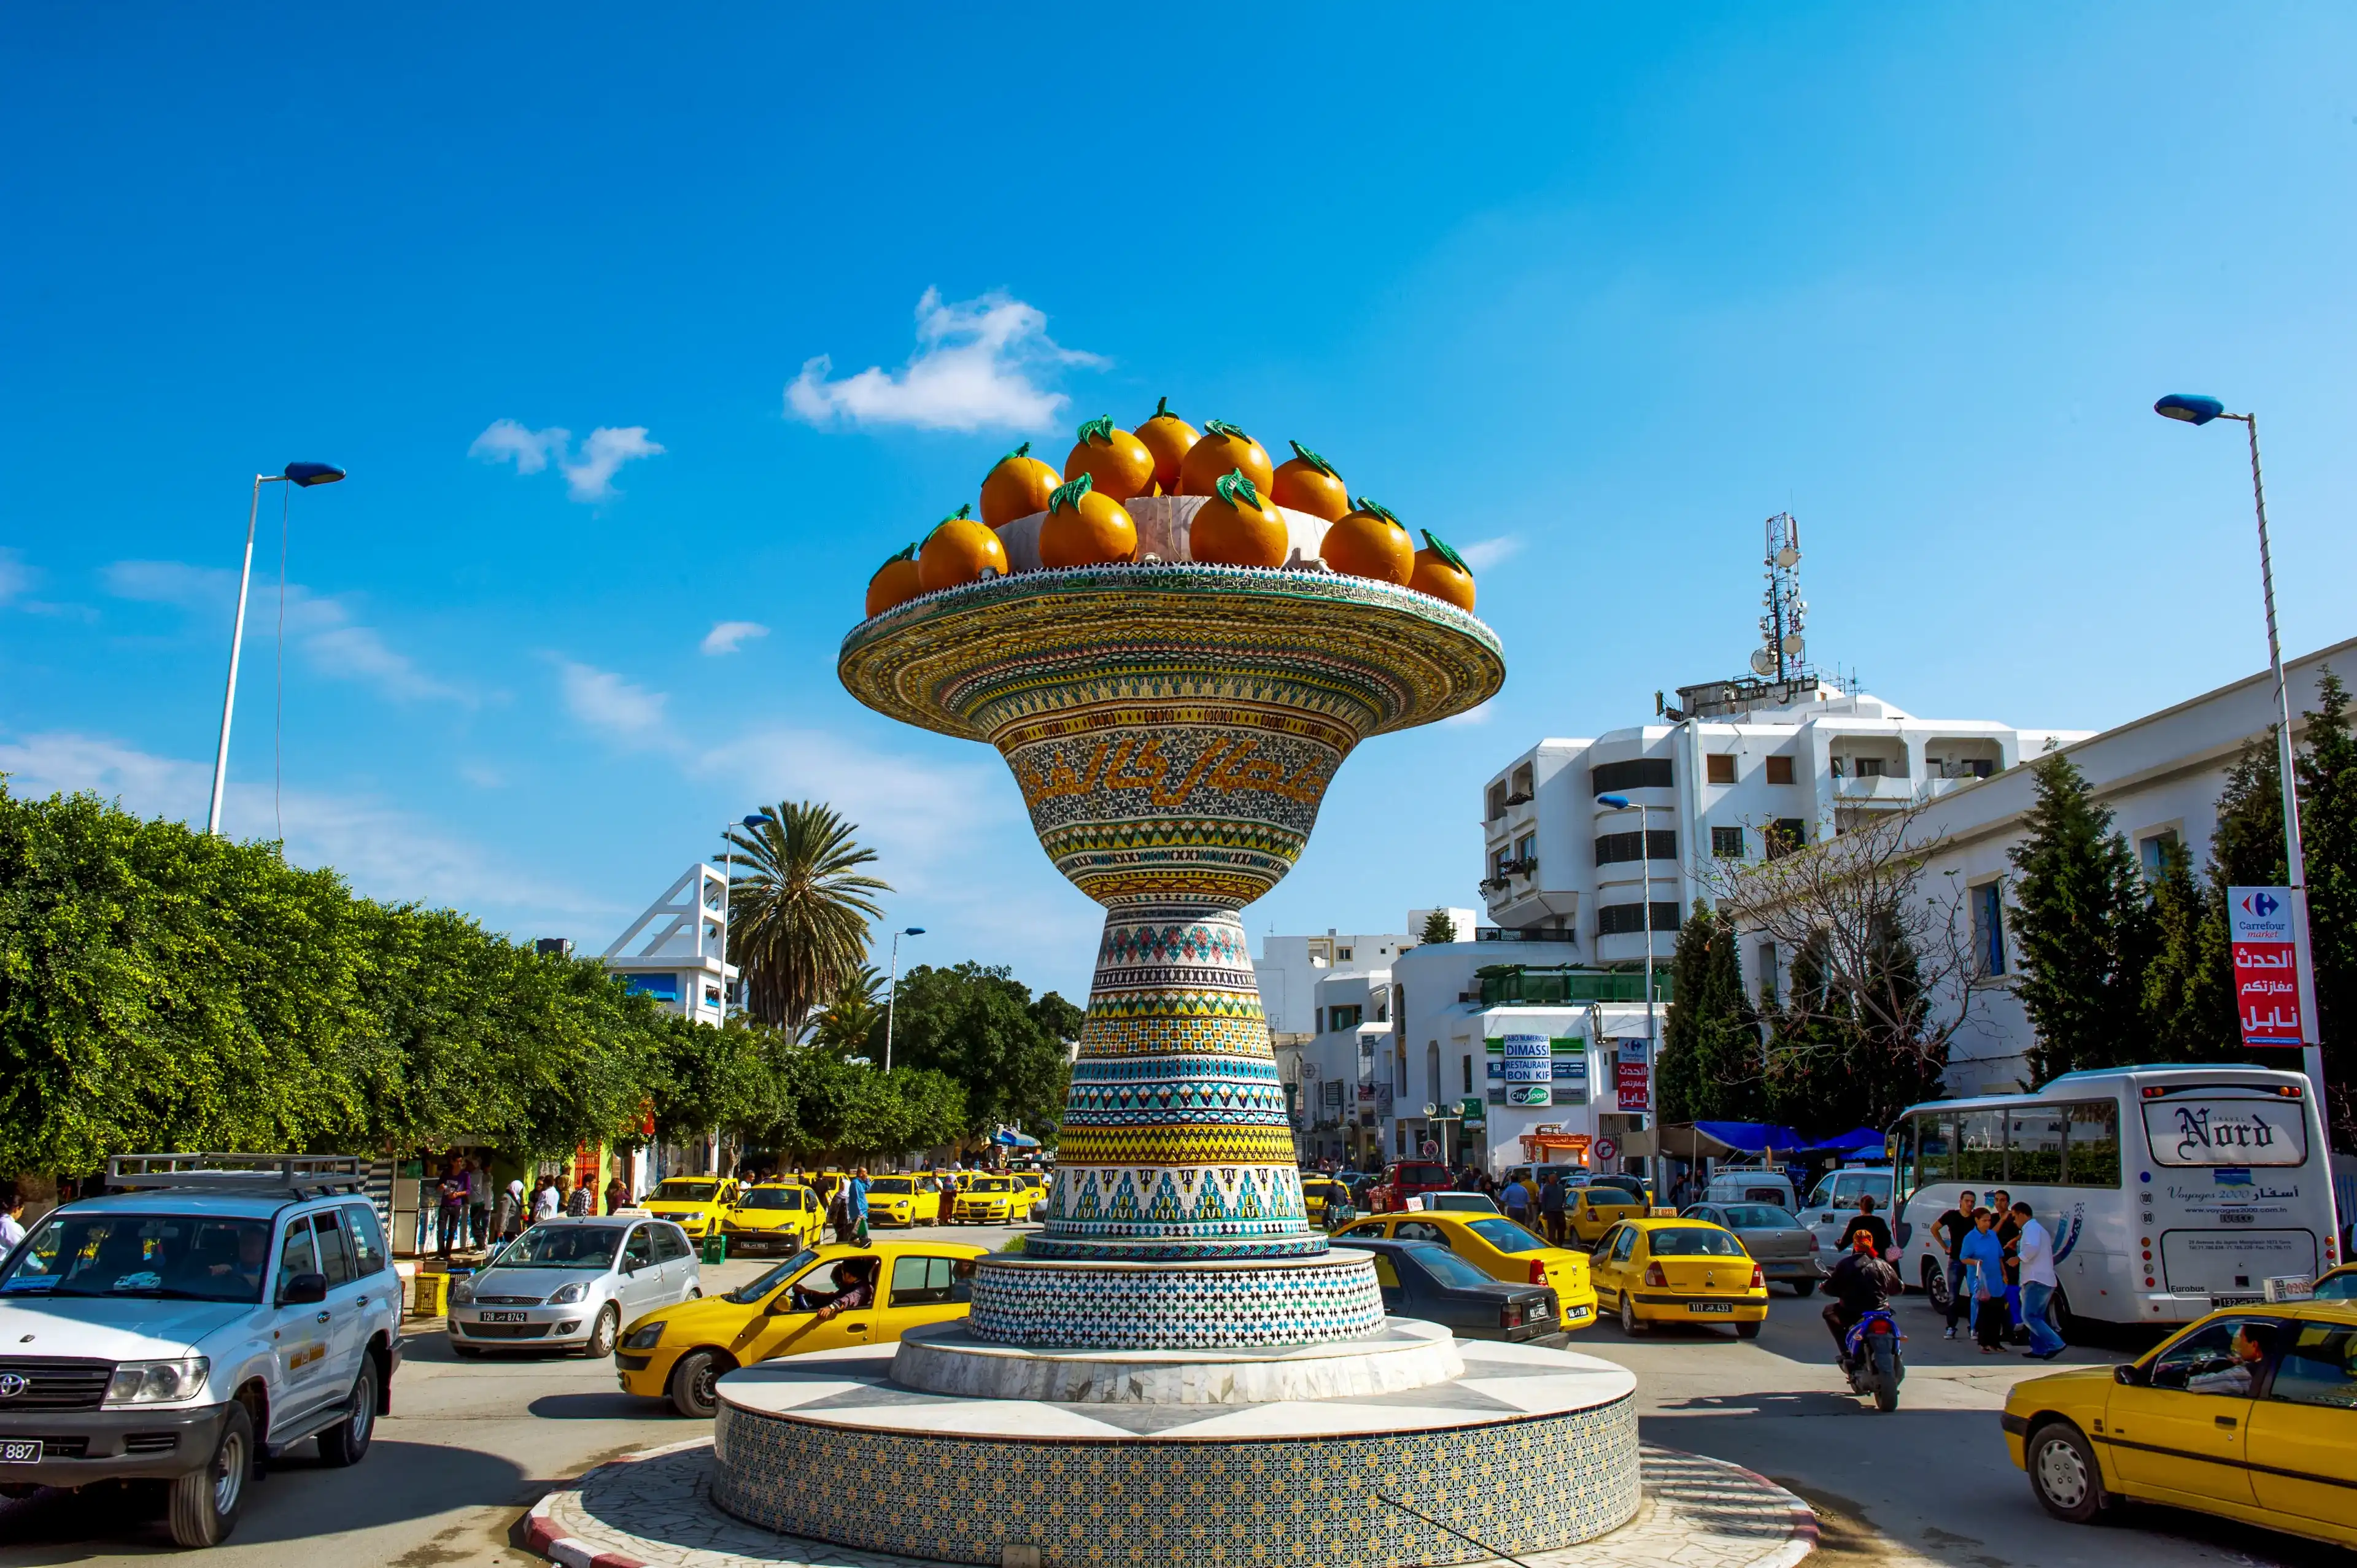 Nabeul. Tunisia. 08/29/2017. Ceramic sculpture adorning a roundabout in the city